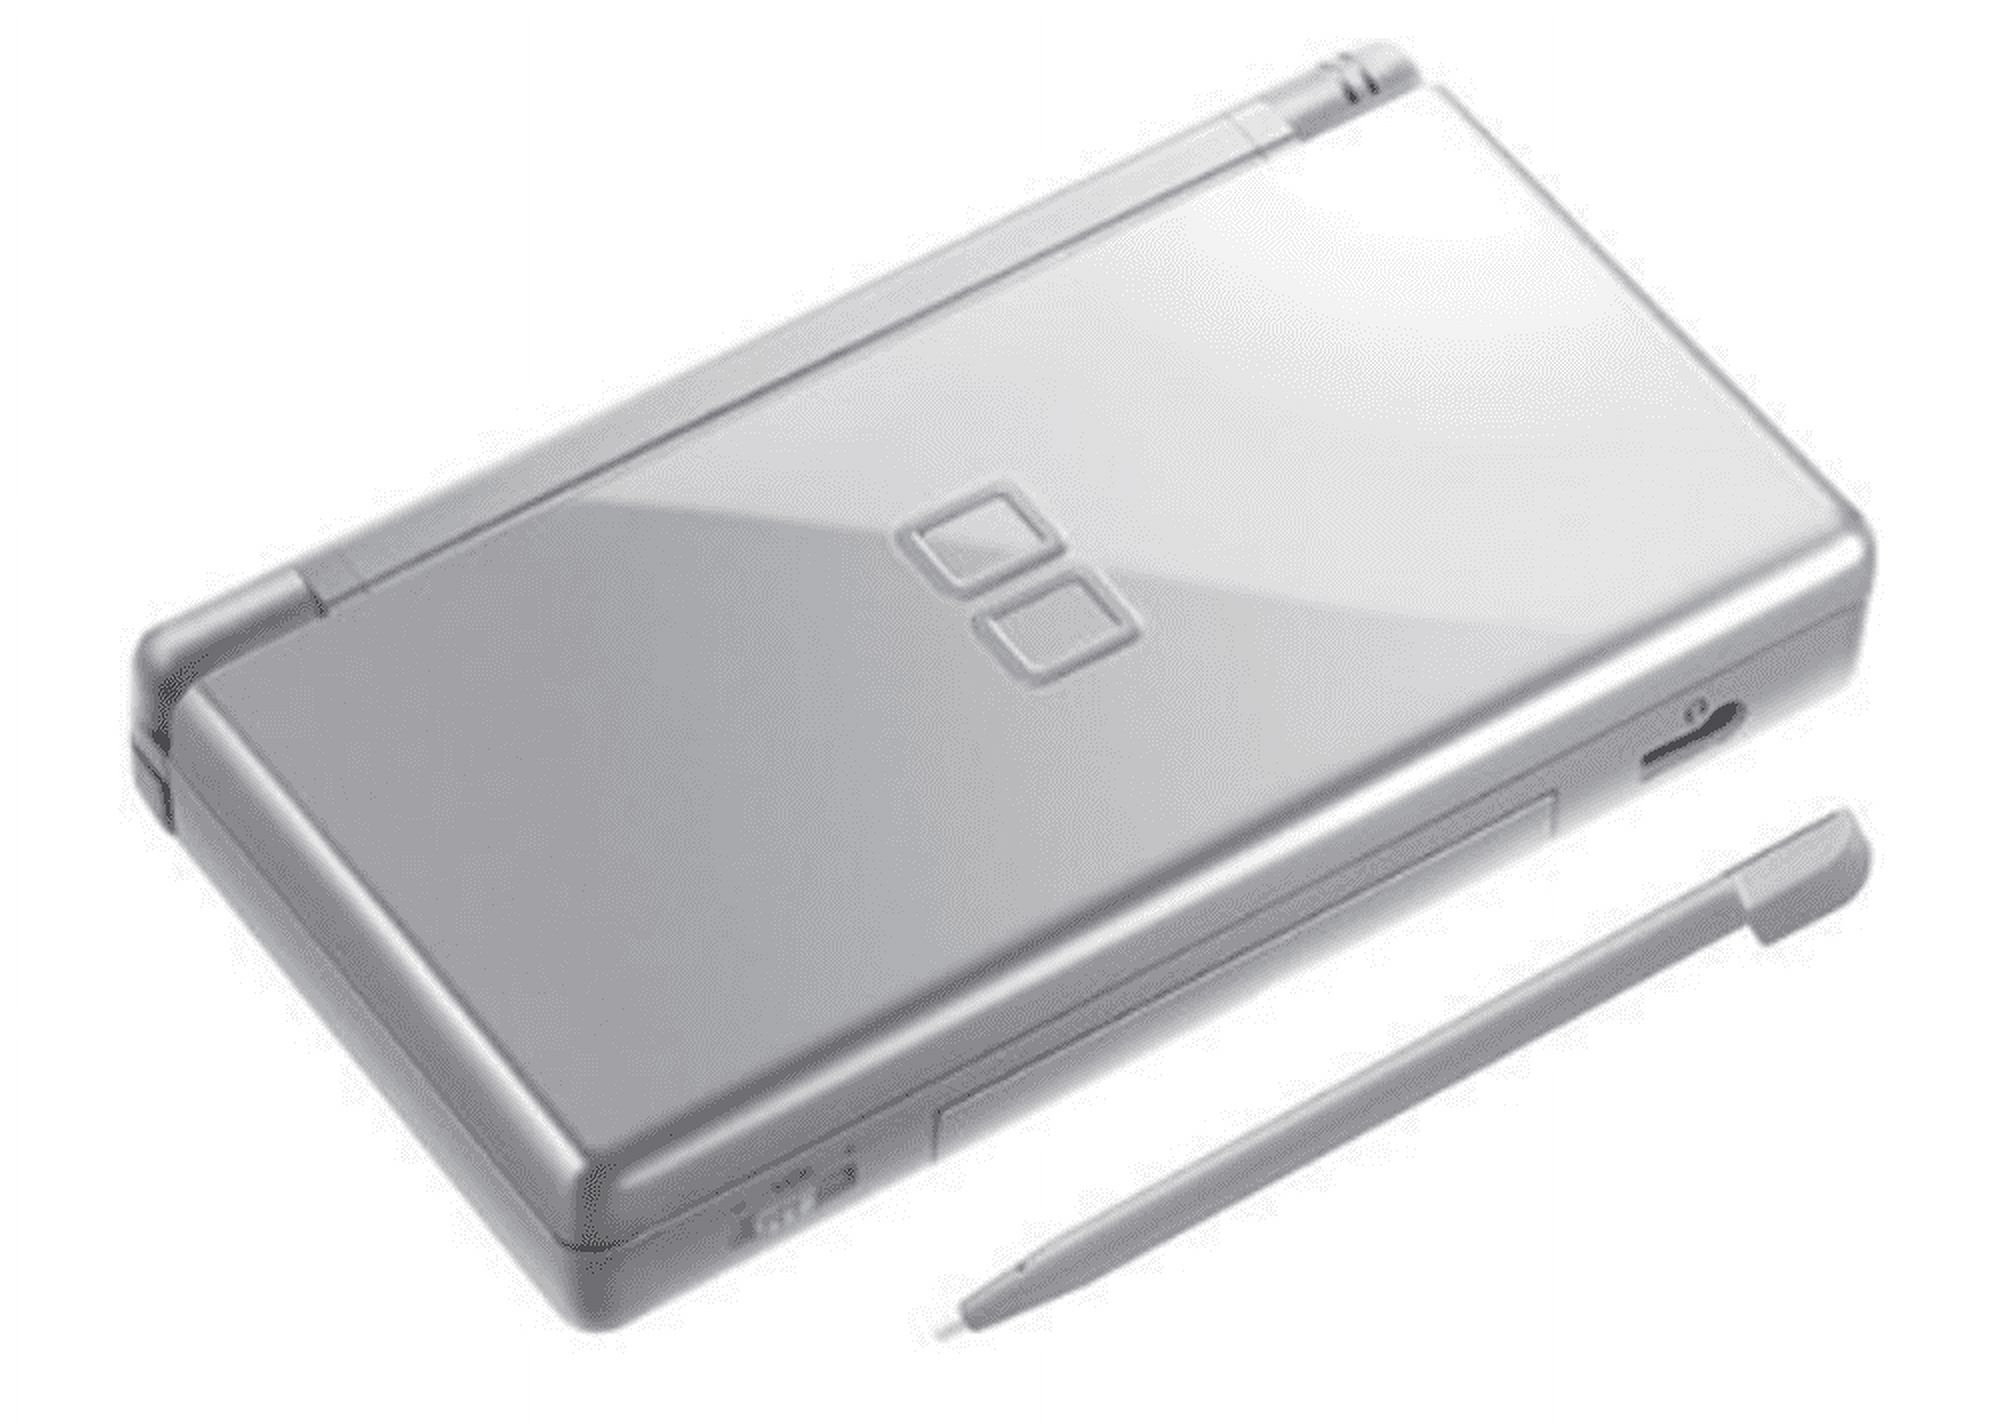 Authentic Nintendo DS Lite Metallic Silver Gray with Stylus and Charger - 100% OEM - image 2 of 3